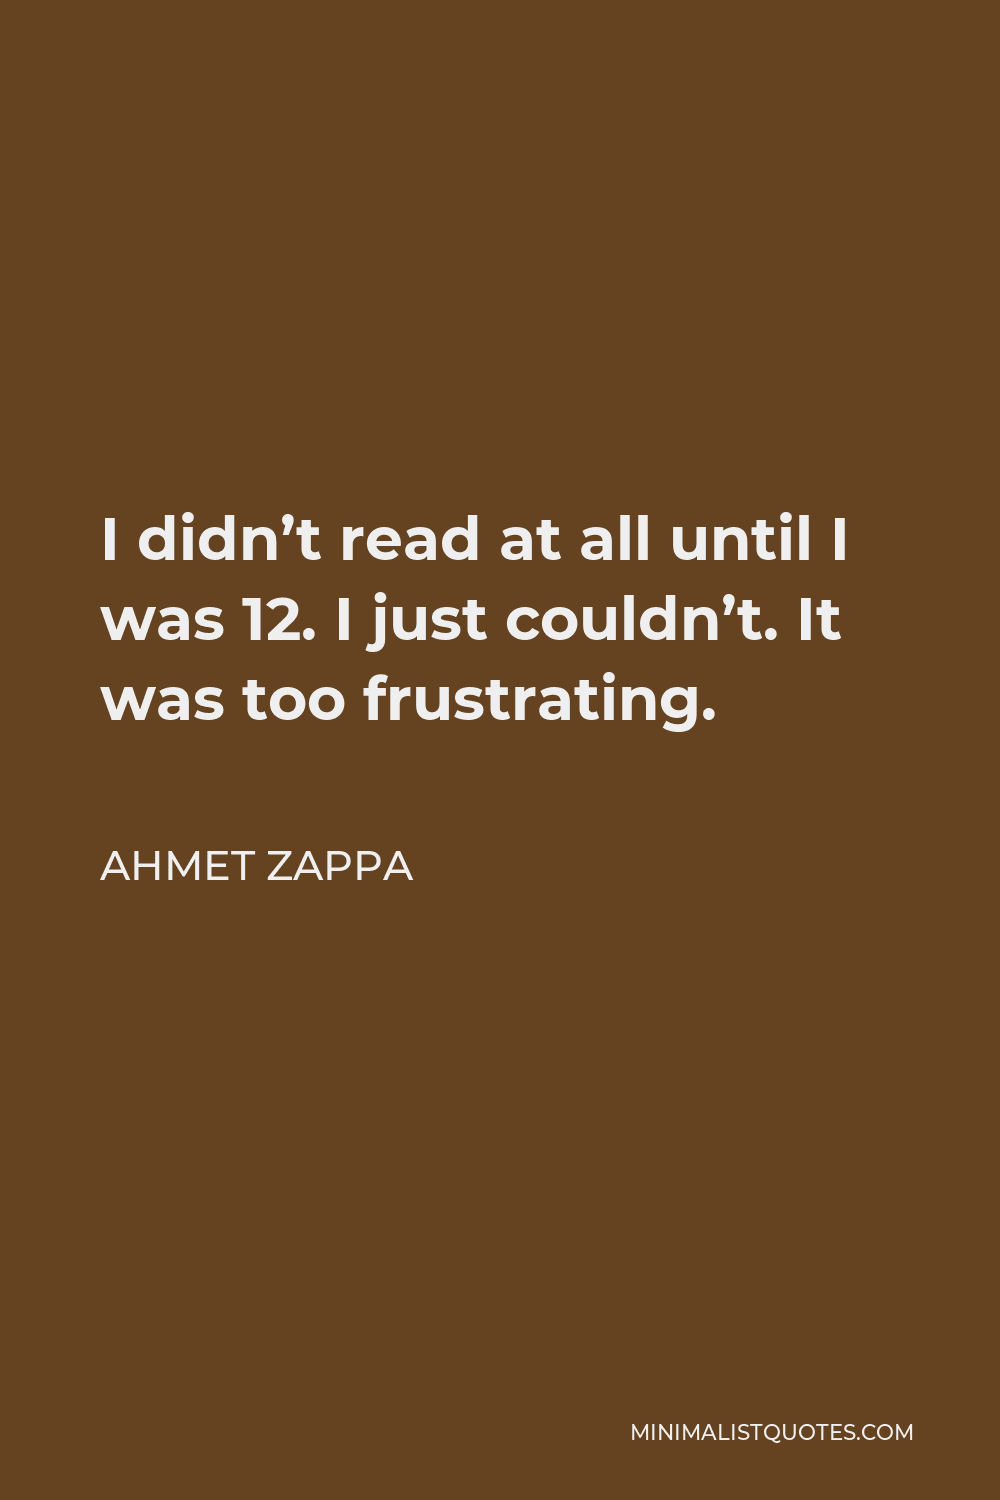 Ahmet Zappa Quote - I didn’t read at all until I was 12. I just couldn’t. It was too frustrating.